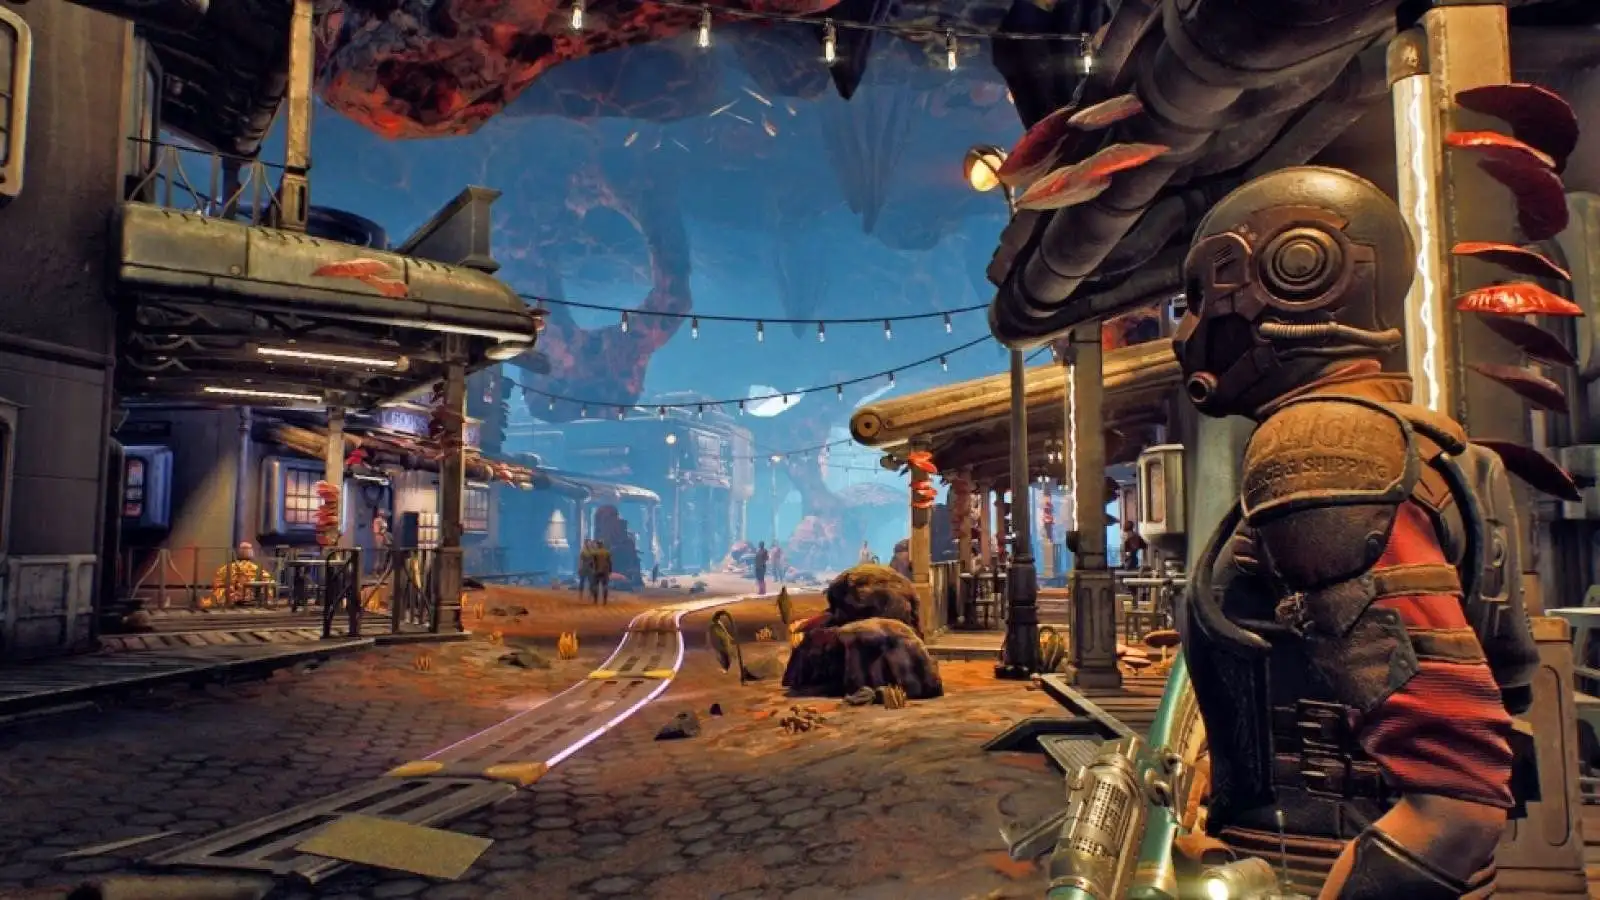 The Outer Worlds Guide Wiki: Tips, Tricks, Walkthroughs & More